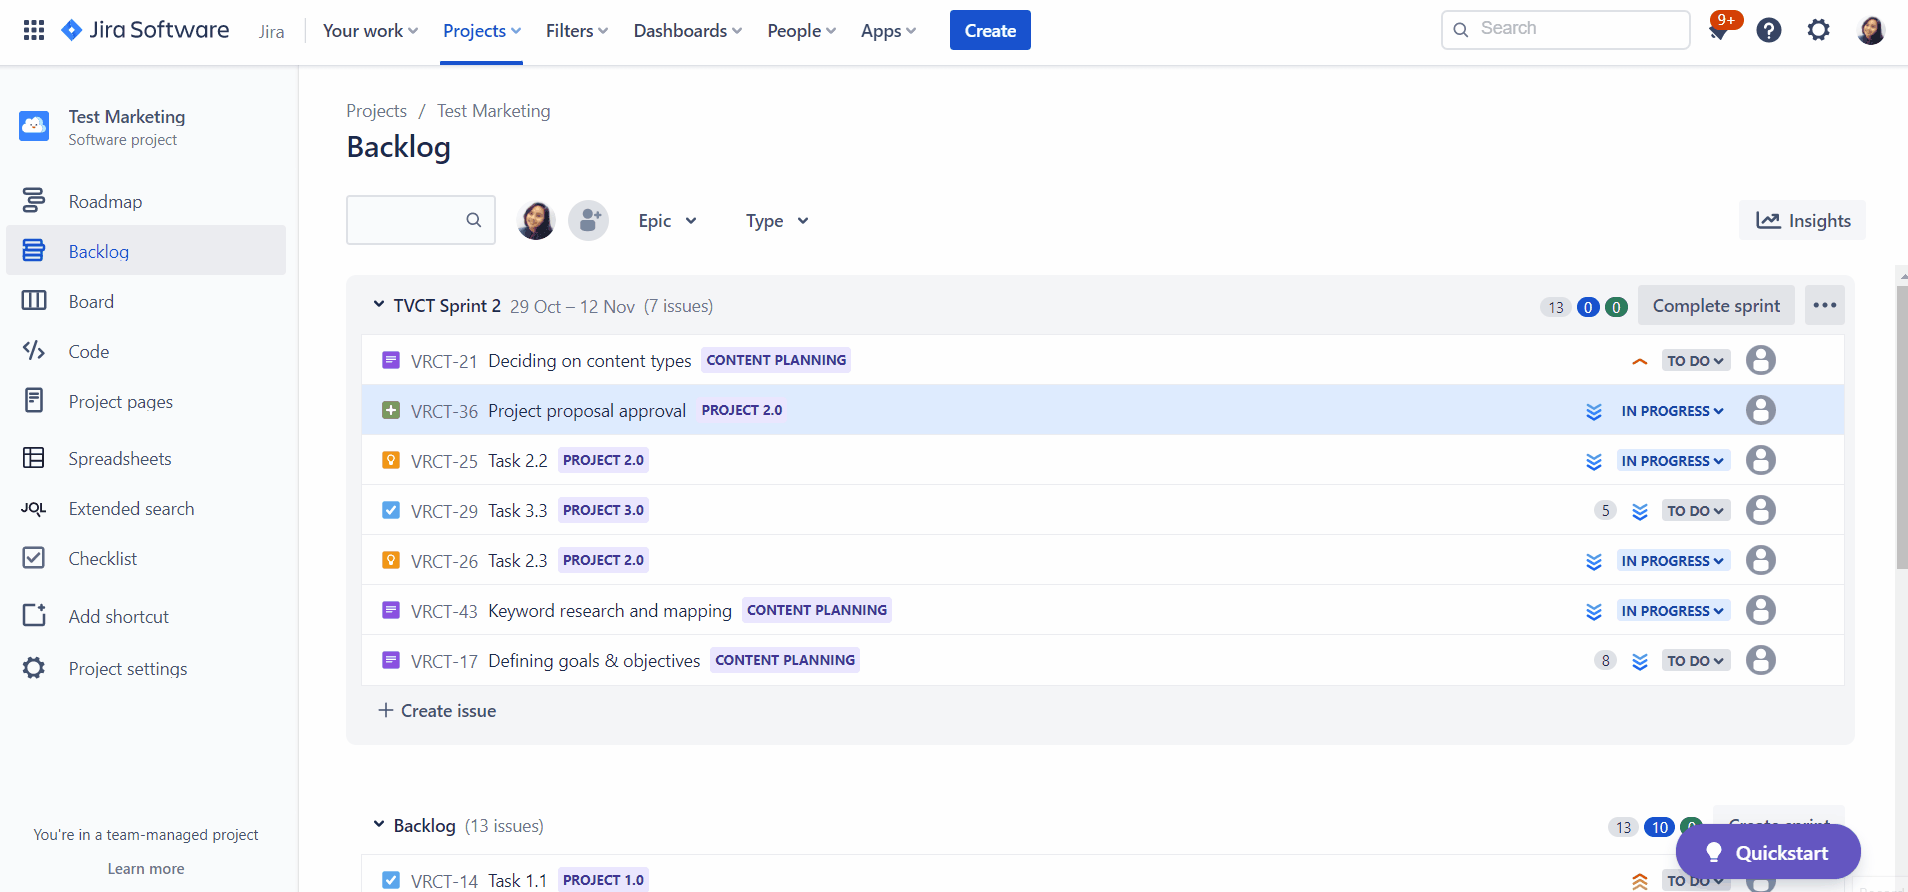 Update the priority level of the Jira issue.